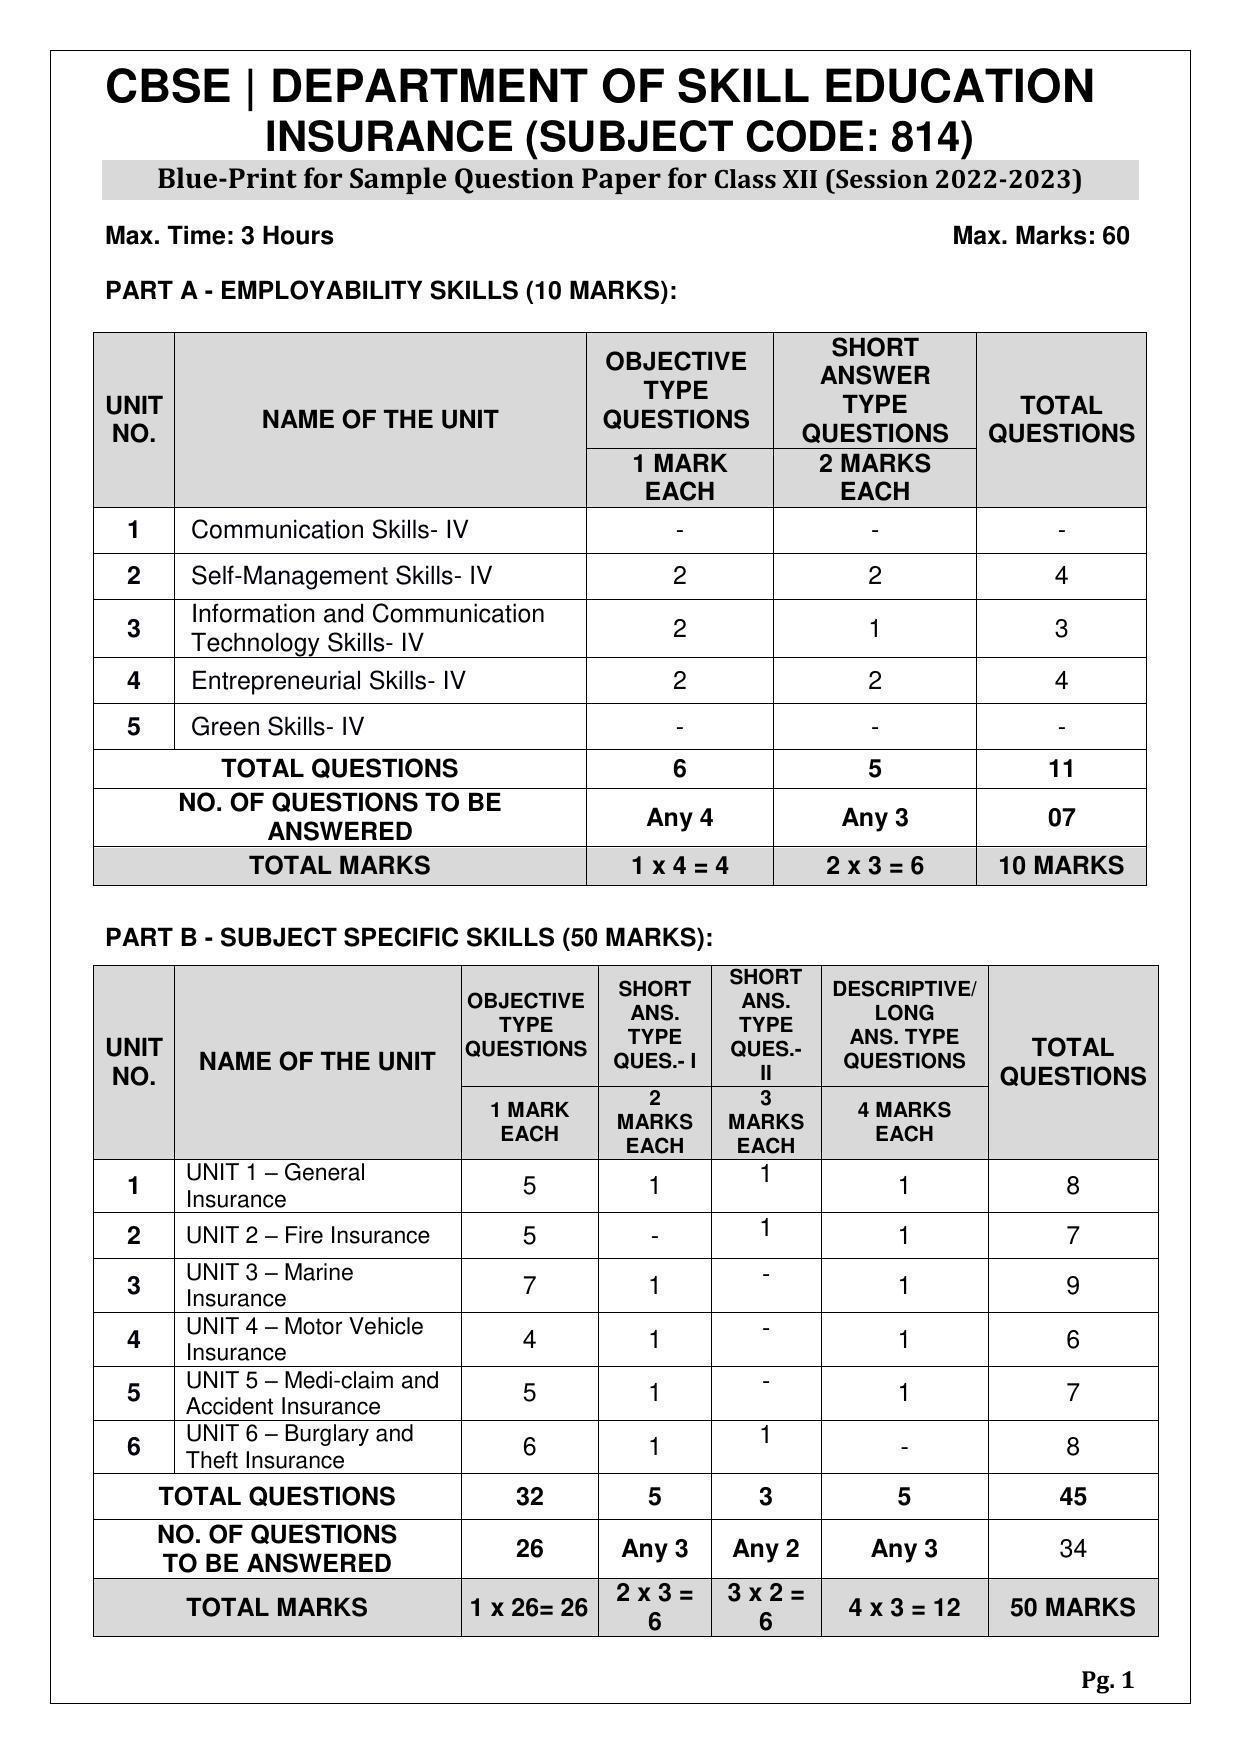 CBSE Class 12 Insurance (Skill Education) Sample Papers 2023 - Page 1